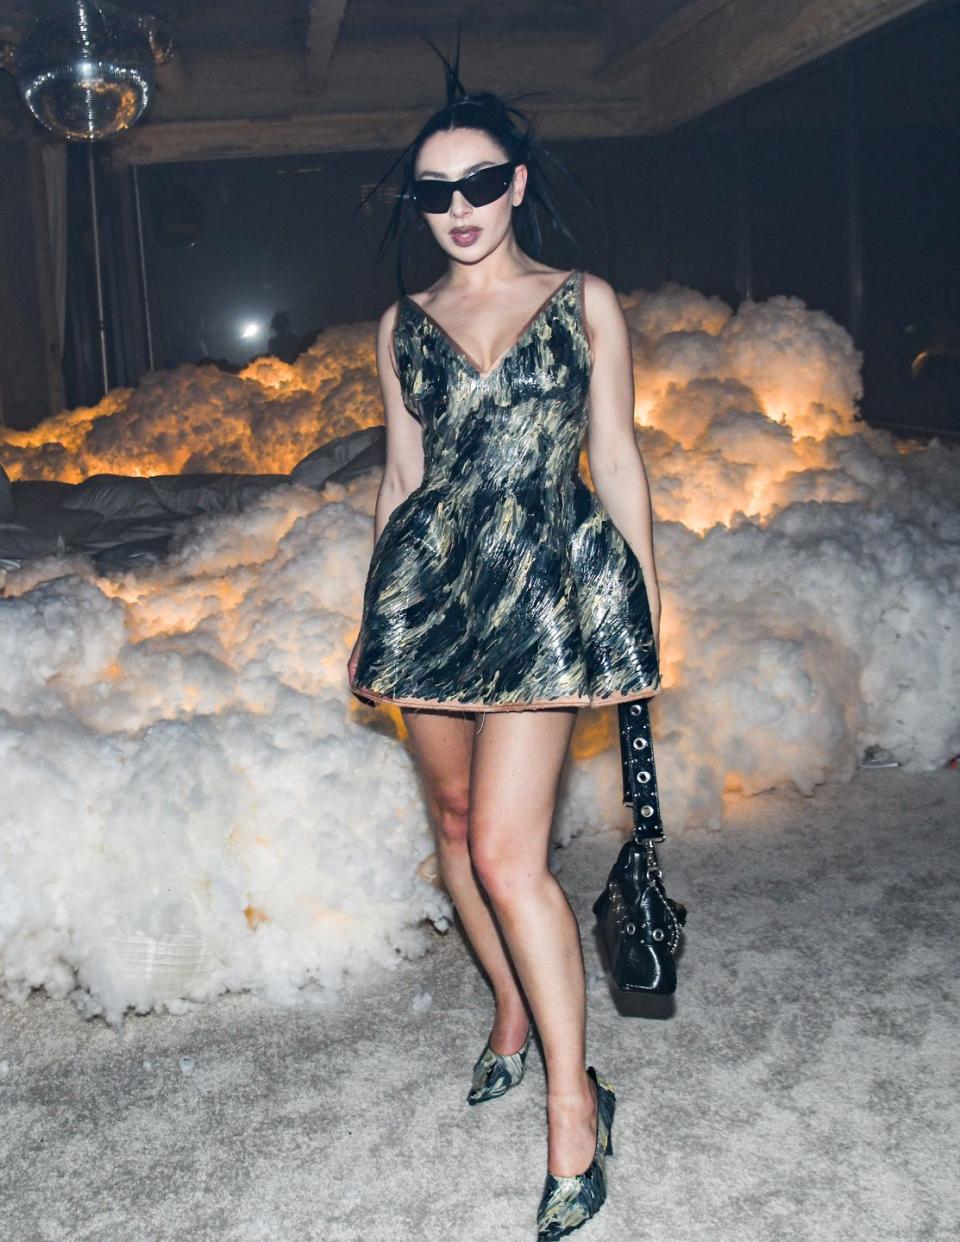 charli xcx at the après met 2 met gala after party hosted by carlos nazario, emily ratajkowski, francesco risso, paloma elsesser, raul lopez and renell medra on may 6, 2024 in new york, new york photo by aurora rosewwd via getty images